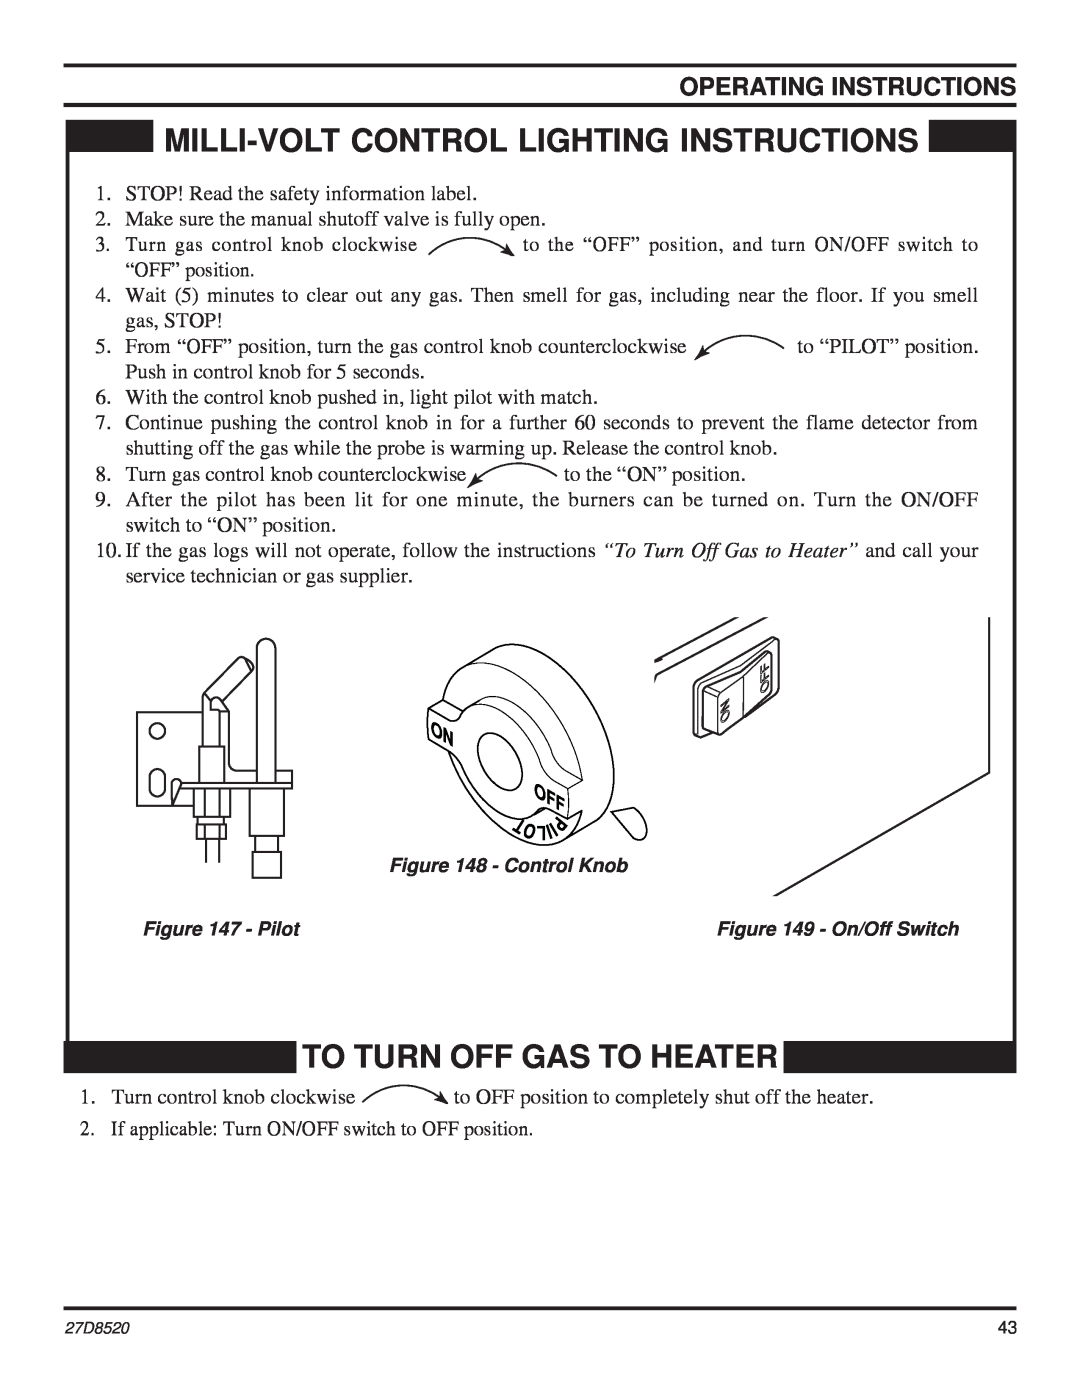 Monessen Hearth VWF30, VWF36 Milli-Voltcontrol Lighting Instructions, To Turn Off Gas To Heater, Operating Instructions 